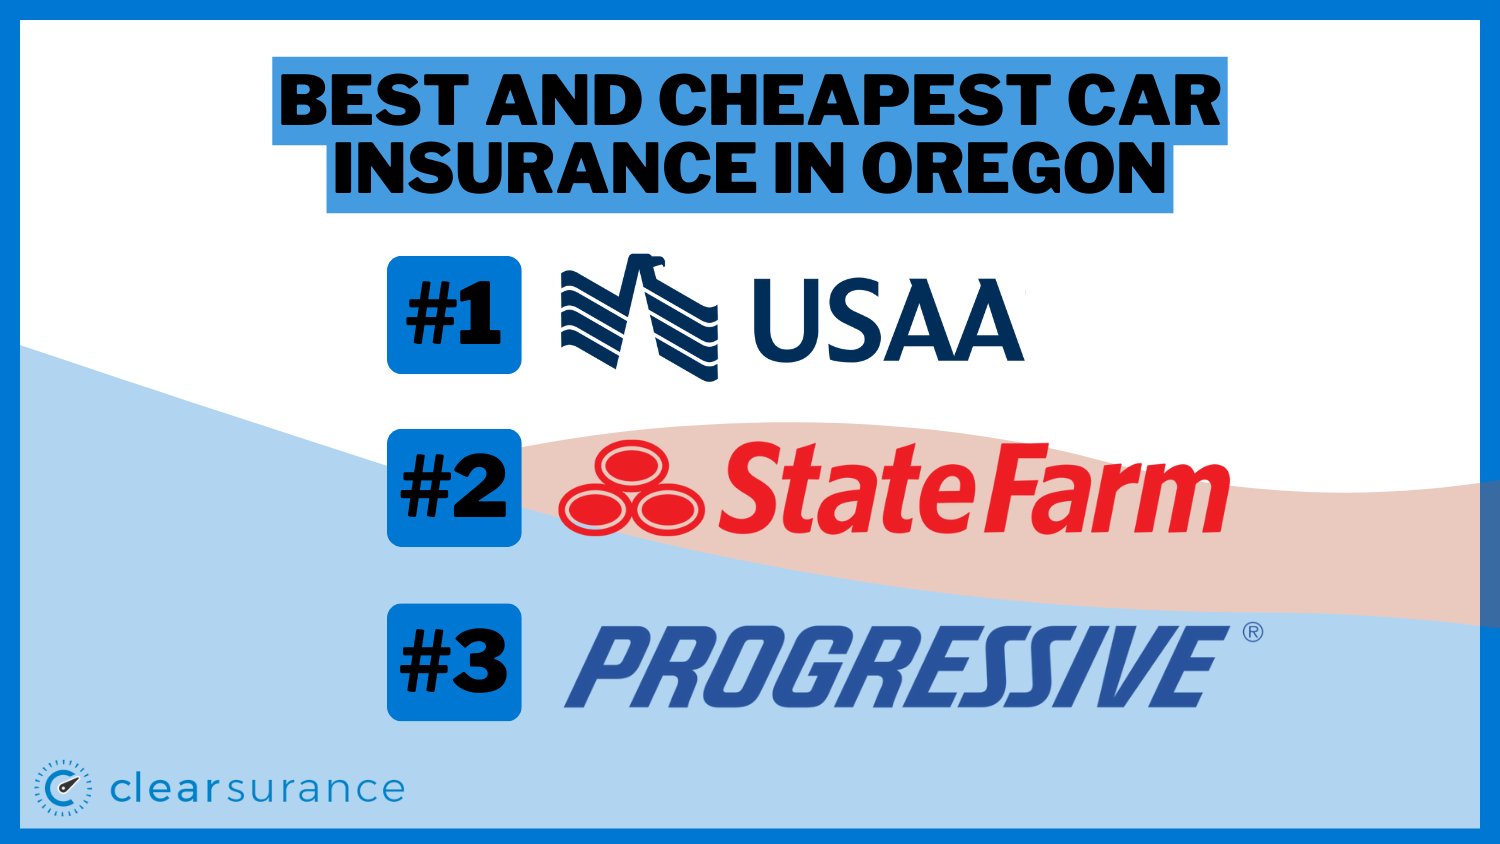 Best and Cheapest Car Insurance in Oregon